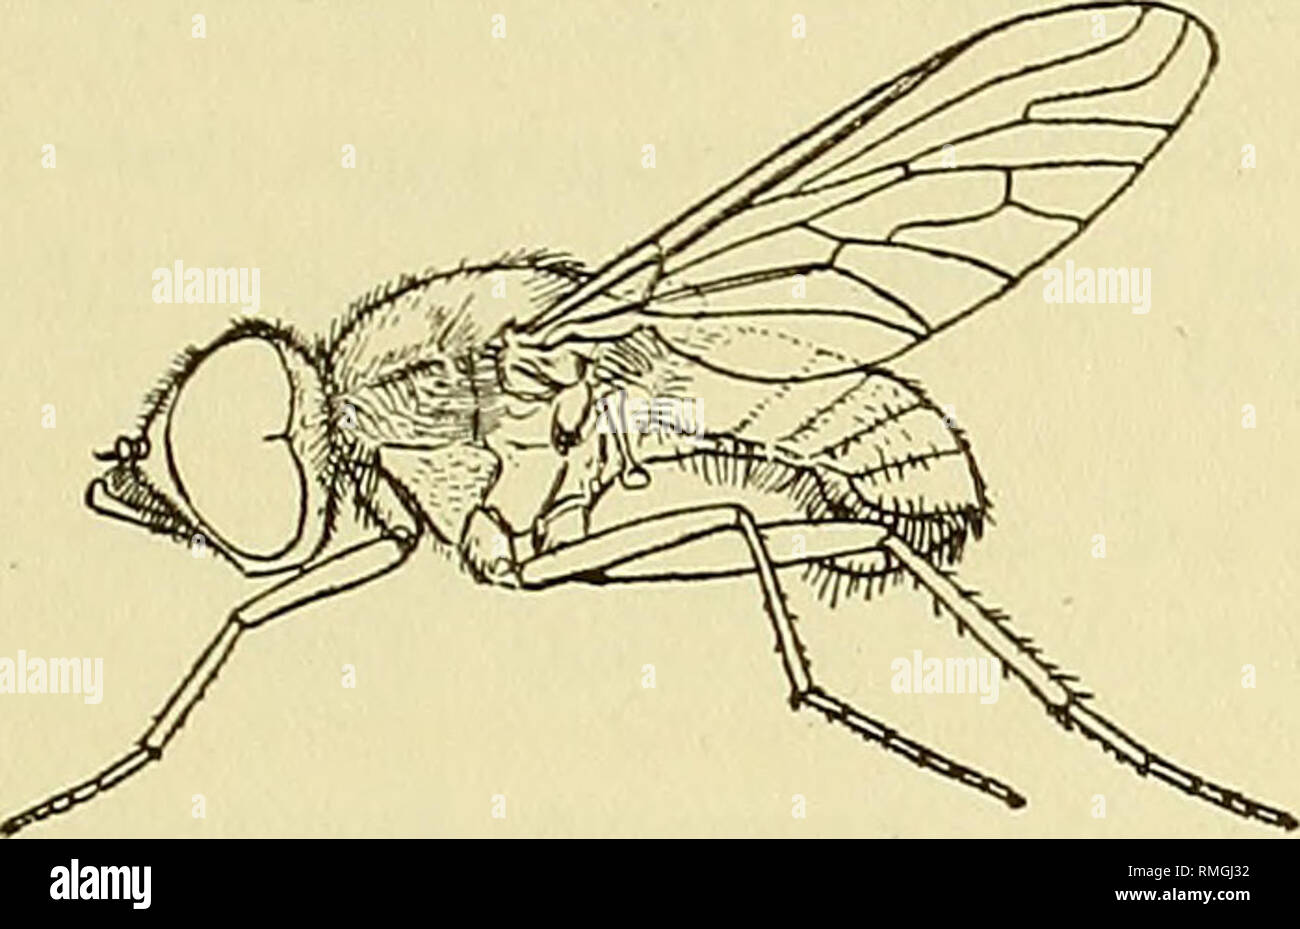 . An annotated list of the Diptera (flies) of Oregon. Diptera. Vol. XI] COLE AND LOt'ETT—UST OF OREGON DIPTERA 243 collected mostly on sandy stretches along the Hood River on bright sunny days (Cole). 241. Dialineura crassicornis (Will.) Common at Hood River, V-10 to VI-26 (Cole). The habits are like those of Thereva vialis. Williston described the species in the genus Thereva. 242. Metaphragma planiceps (Loew) Burns, V-19 (B. G. Thompson). Family BOMBYLIID^E. Fig. 21. Epacmus nitidus Cole, n. sp. Drawing of holotype. The &quot;bee-flies&quot; are usually more or less covered with fur- like ha Stock Photo